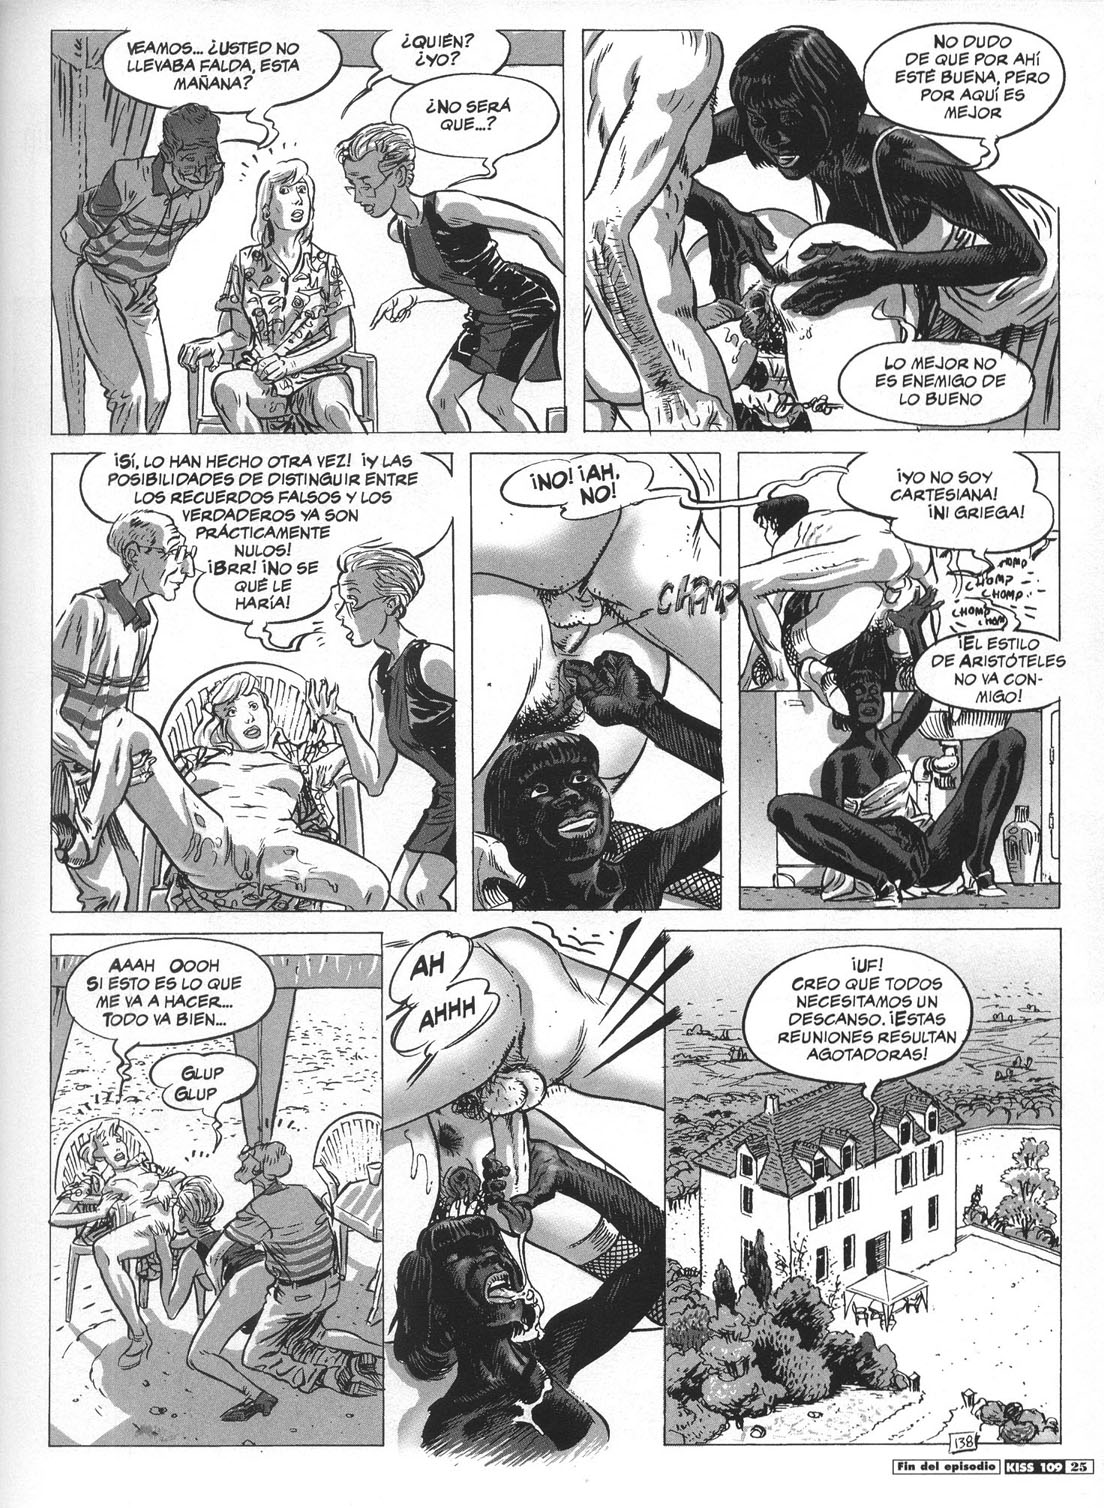 Kiss Comix 109 image number 24